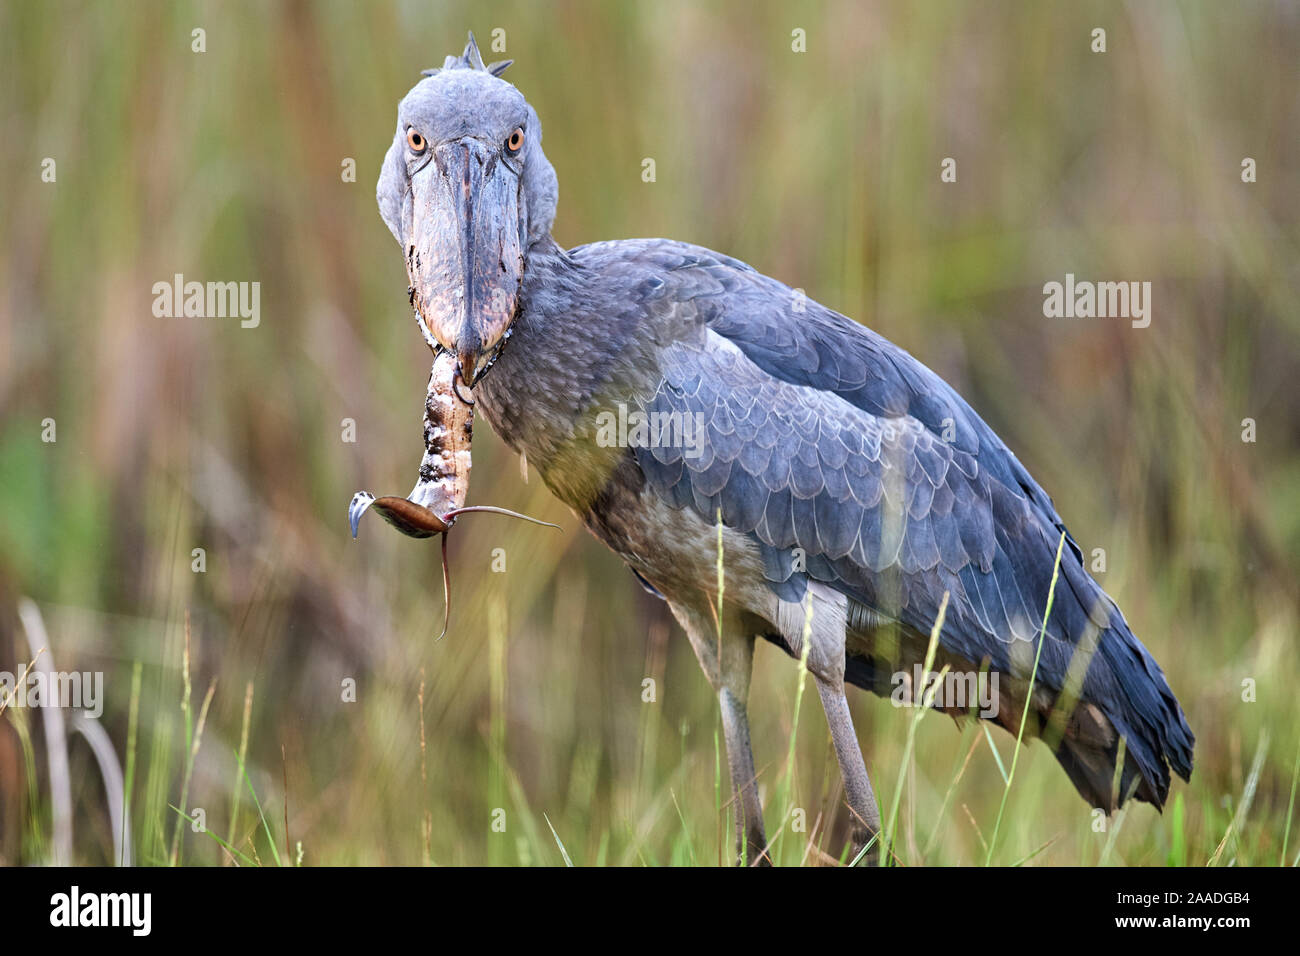 Shoebill stork (Balaeniceps rex) feeding on a Spotted African lungfish (Protopterus dolloi) in the swamps of Mabamba, lake Victoria, Uganda Stock Photo